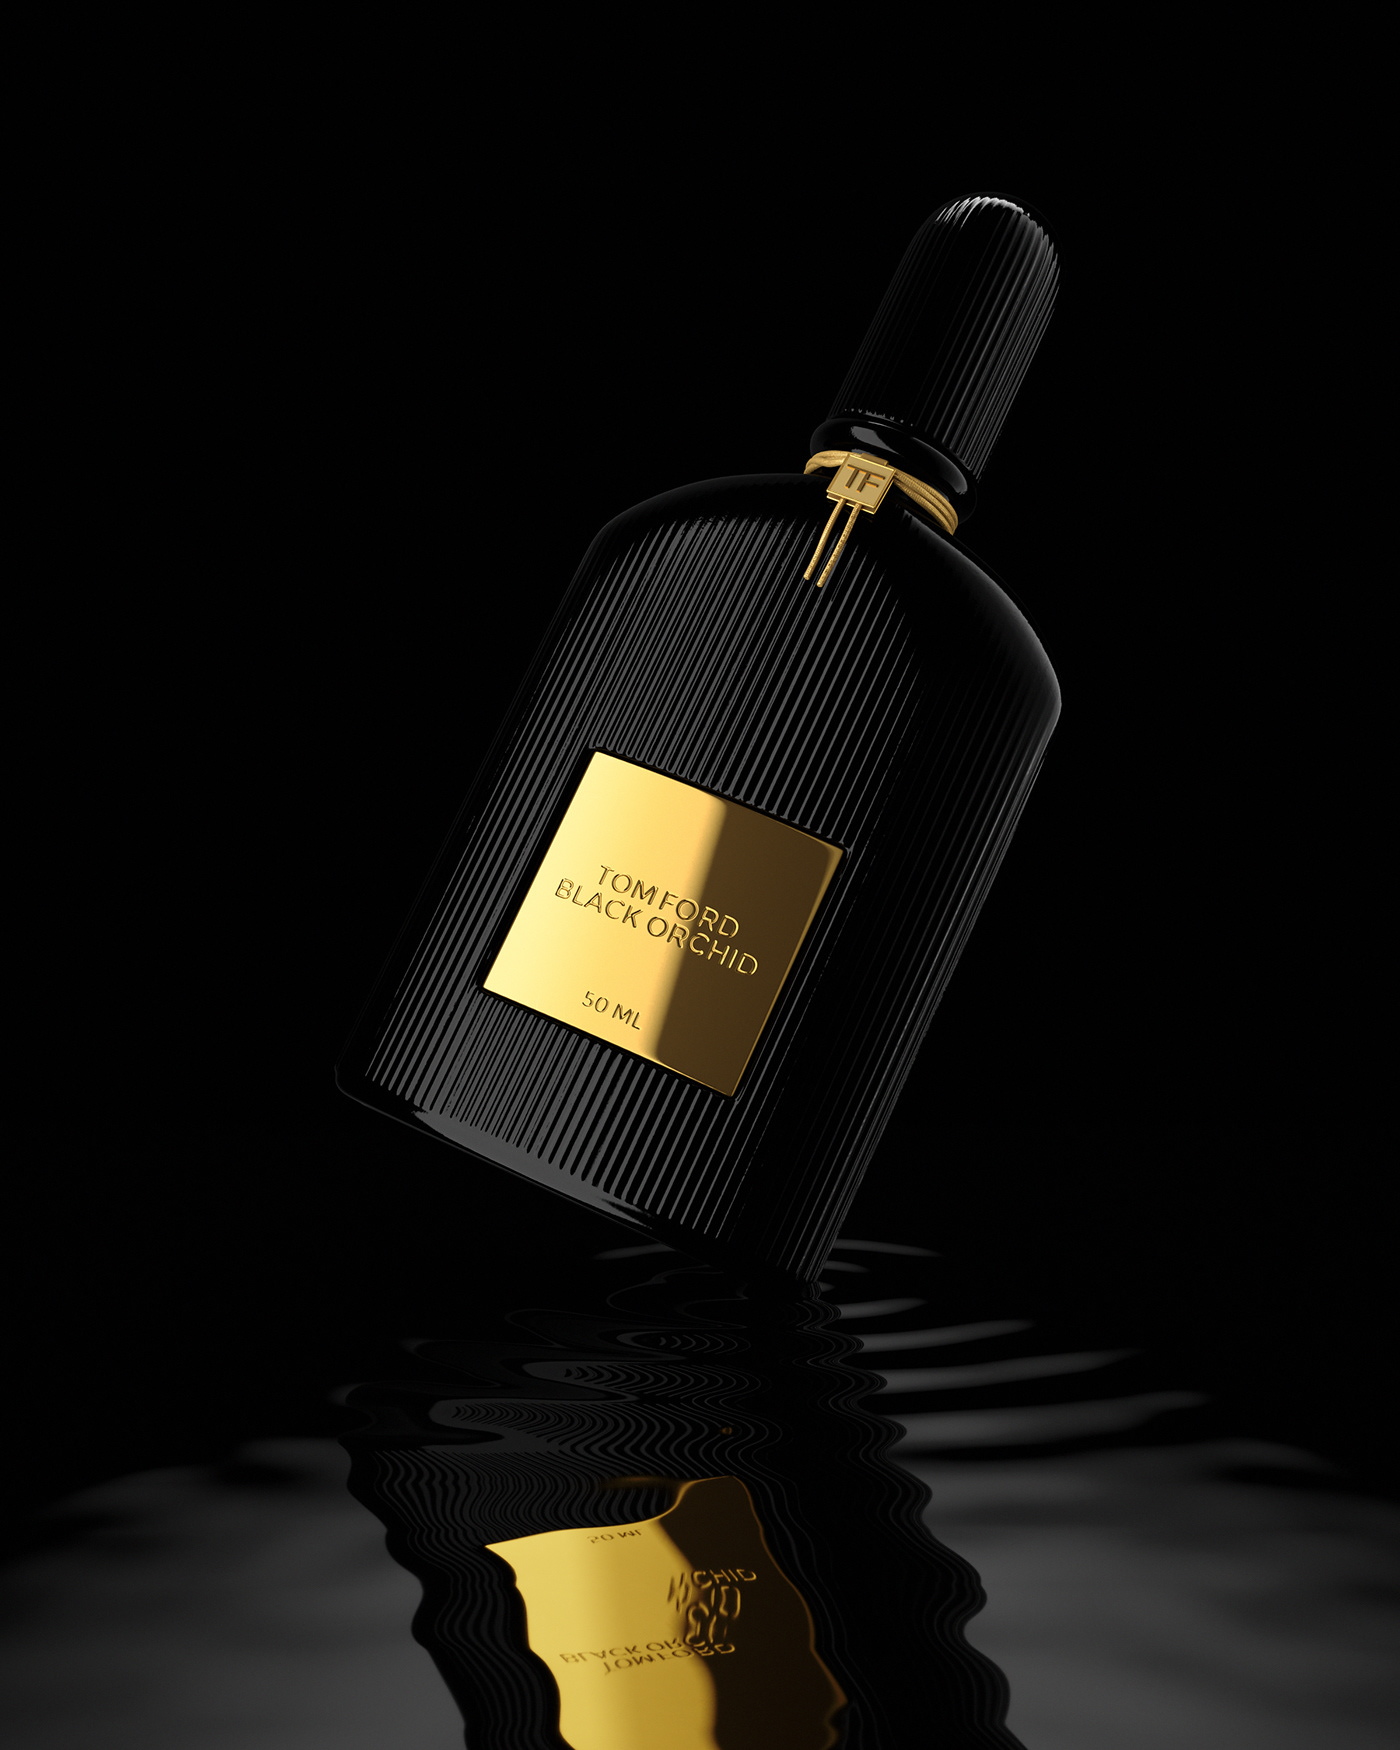 Tom Ford Black orchid CGI visuals, self promotion 3d rendered images